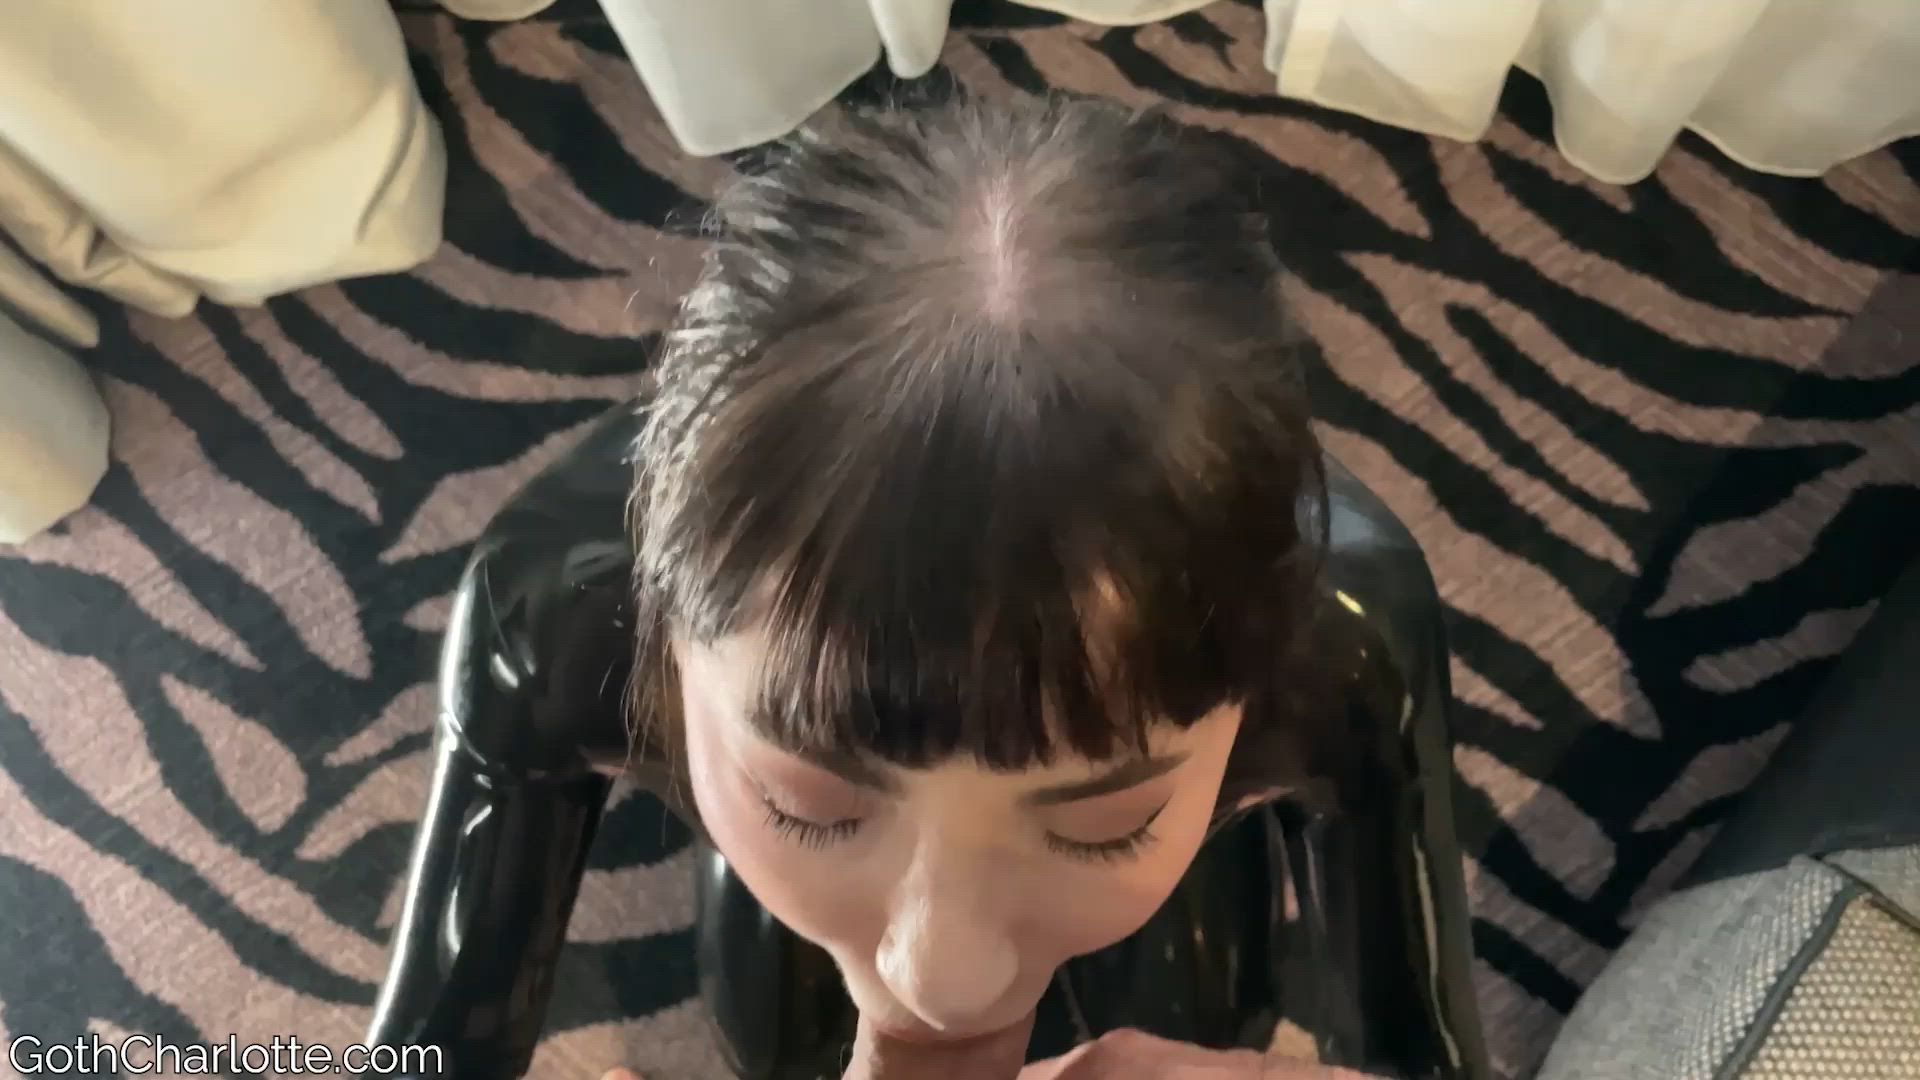 Catsuit porn video with onlyfans model Charlotte Sartre <strong>@gothcharlotte</strong>